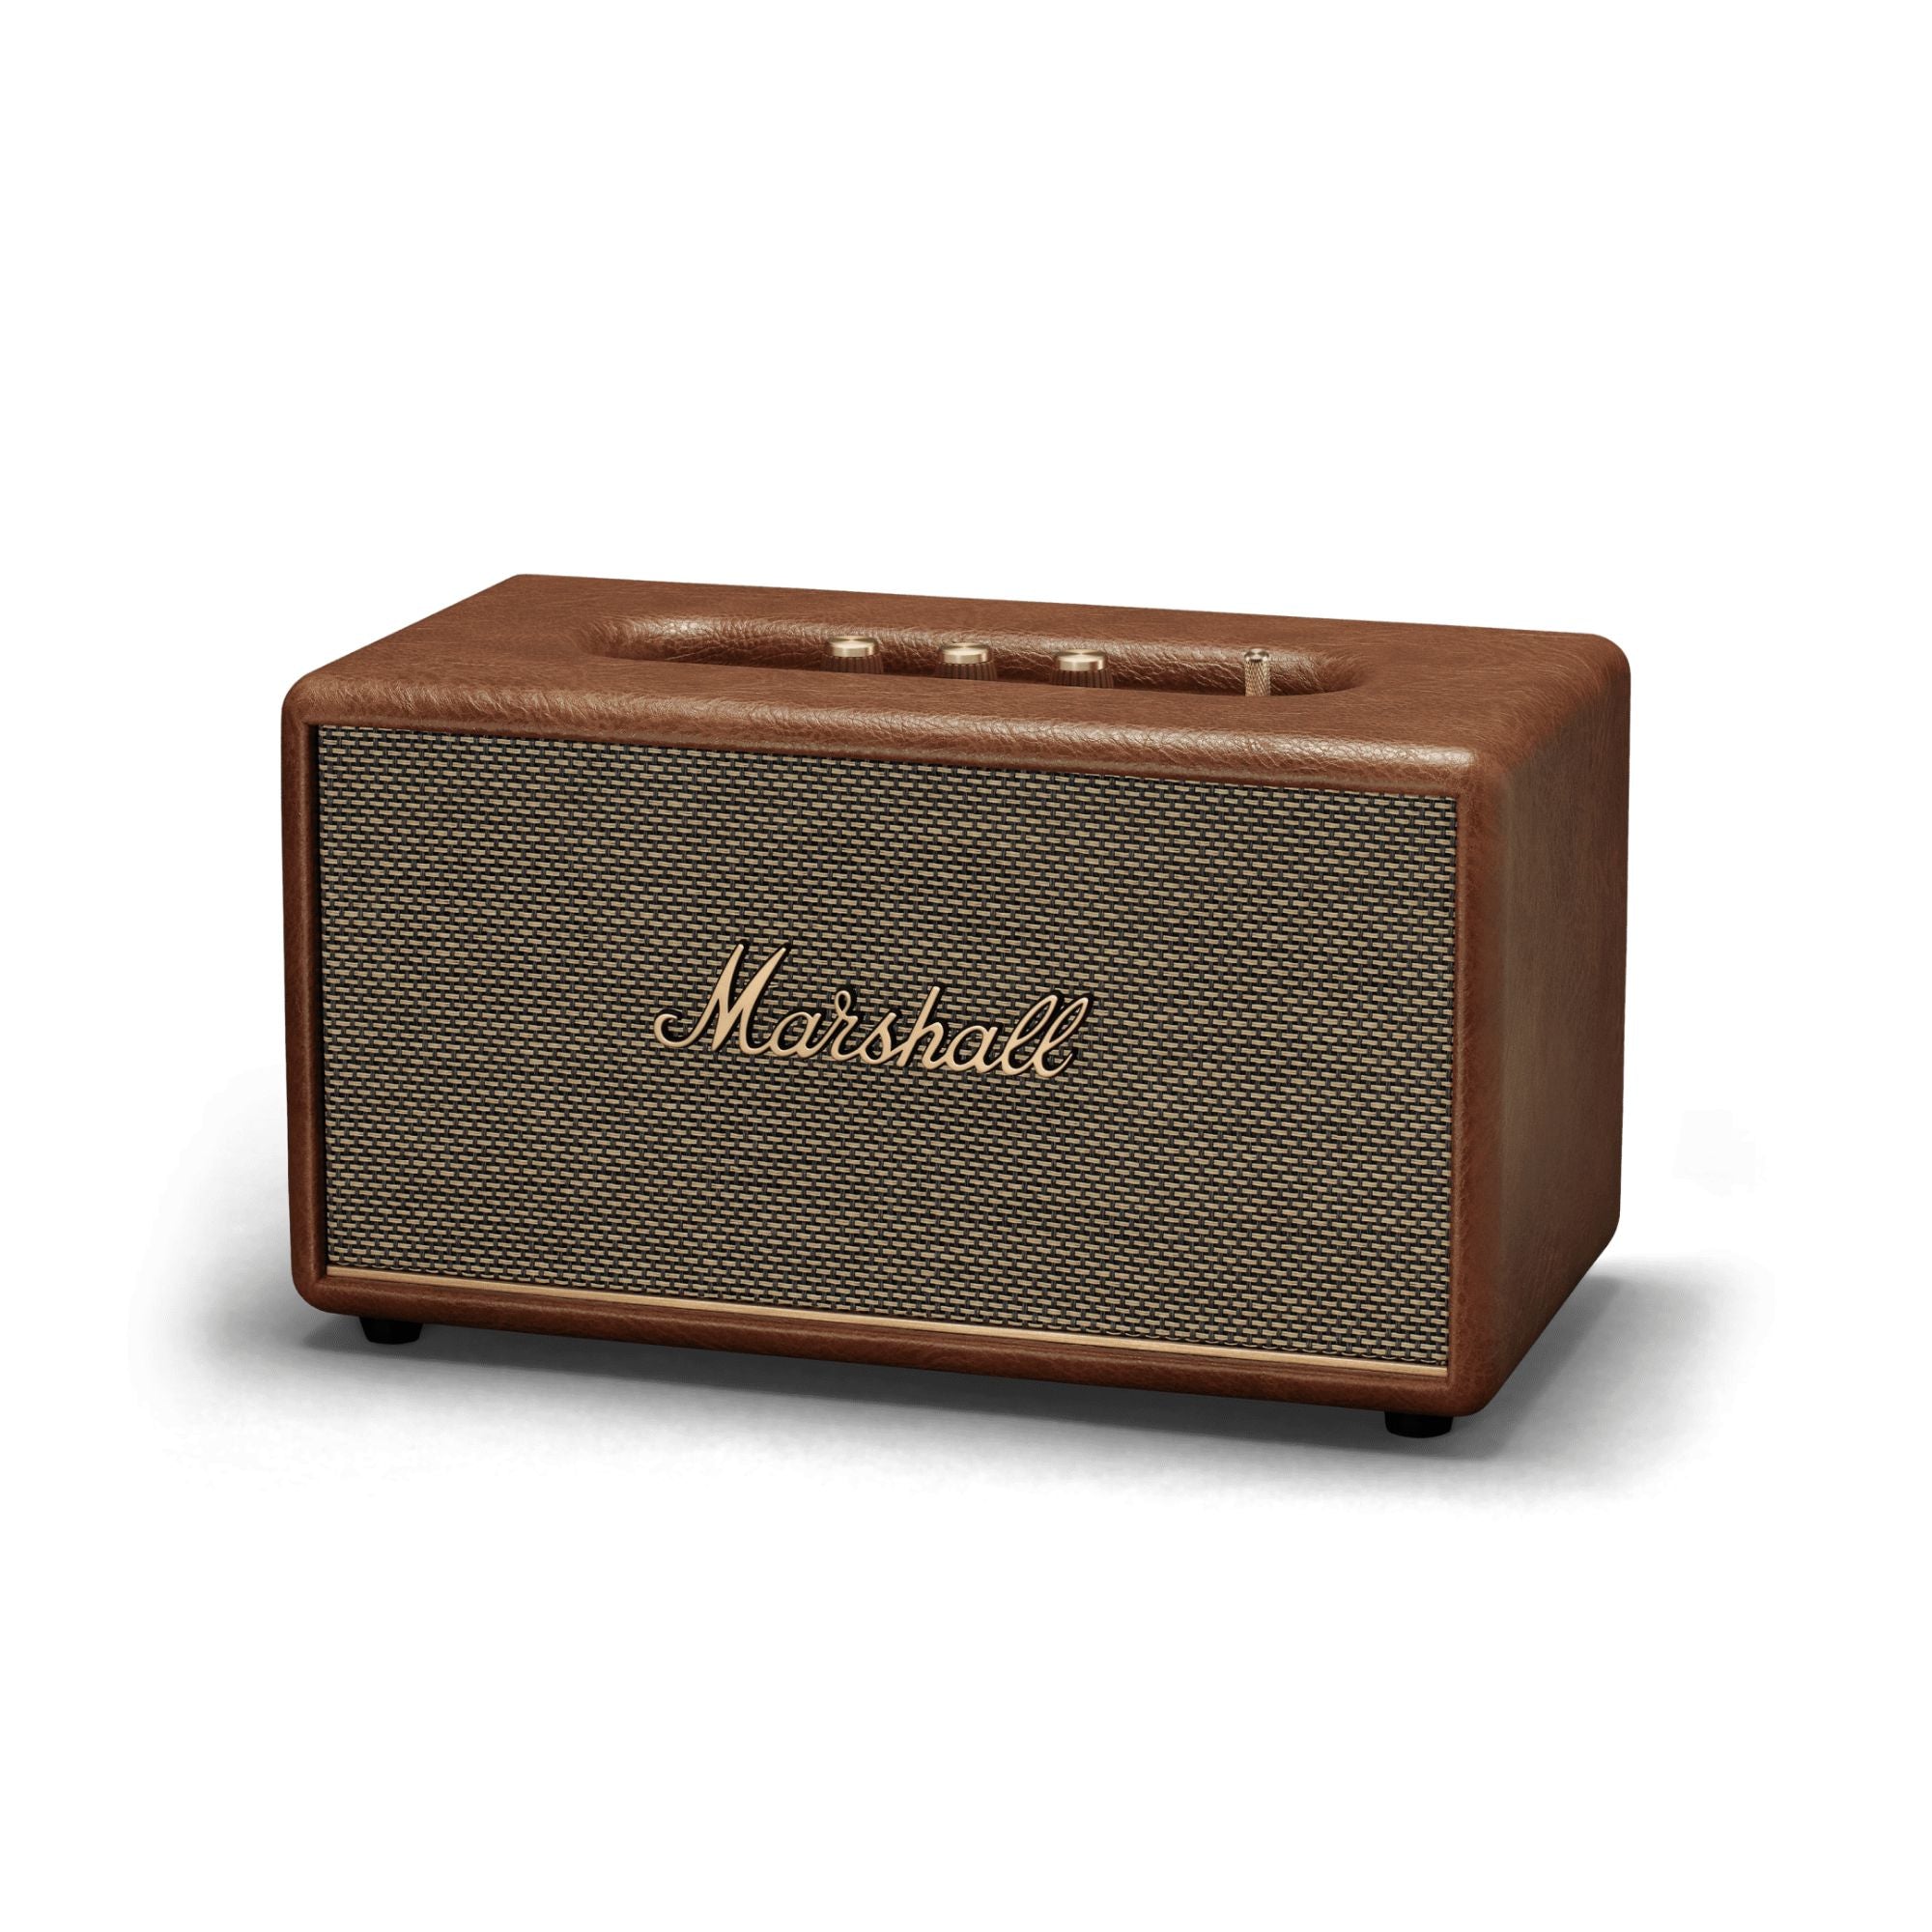 Marshall Stanmore III - The Legendary One Re-Engineered With a Wider Soundstage, Marshall, Bluetooth Speaker - AVStore.in